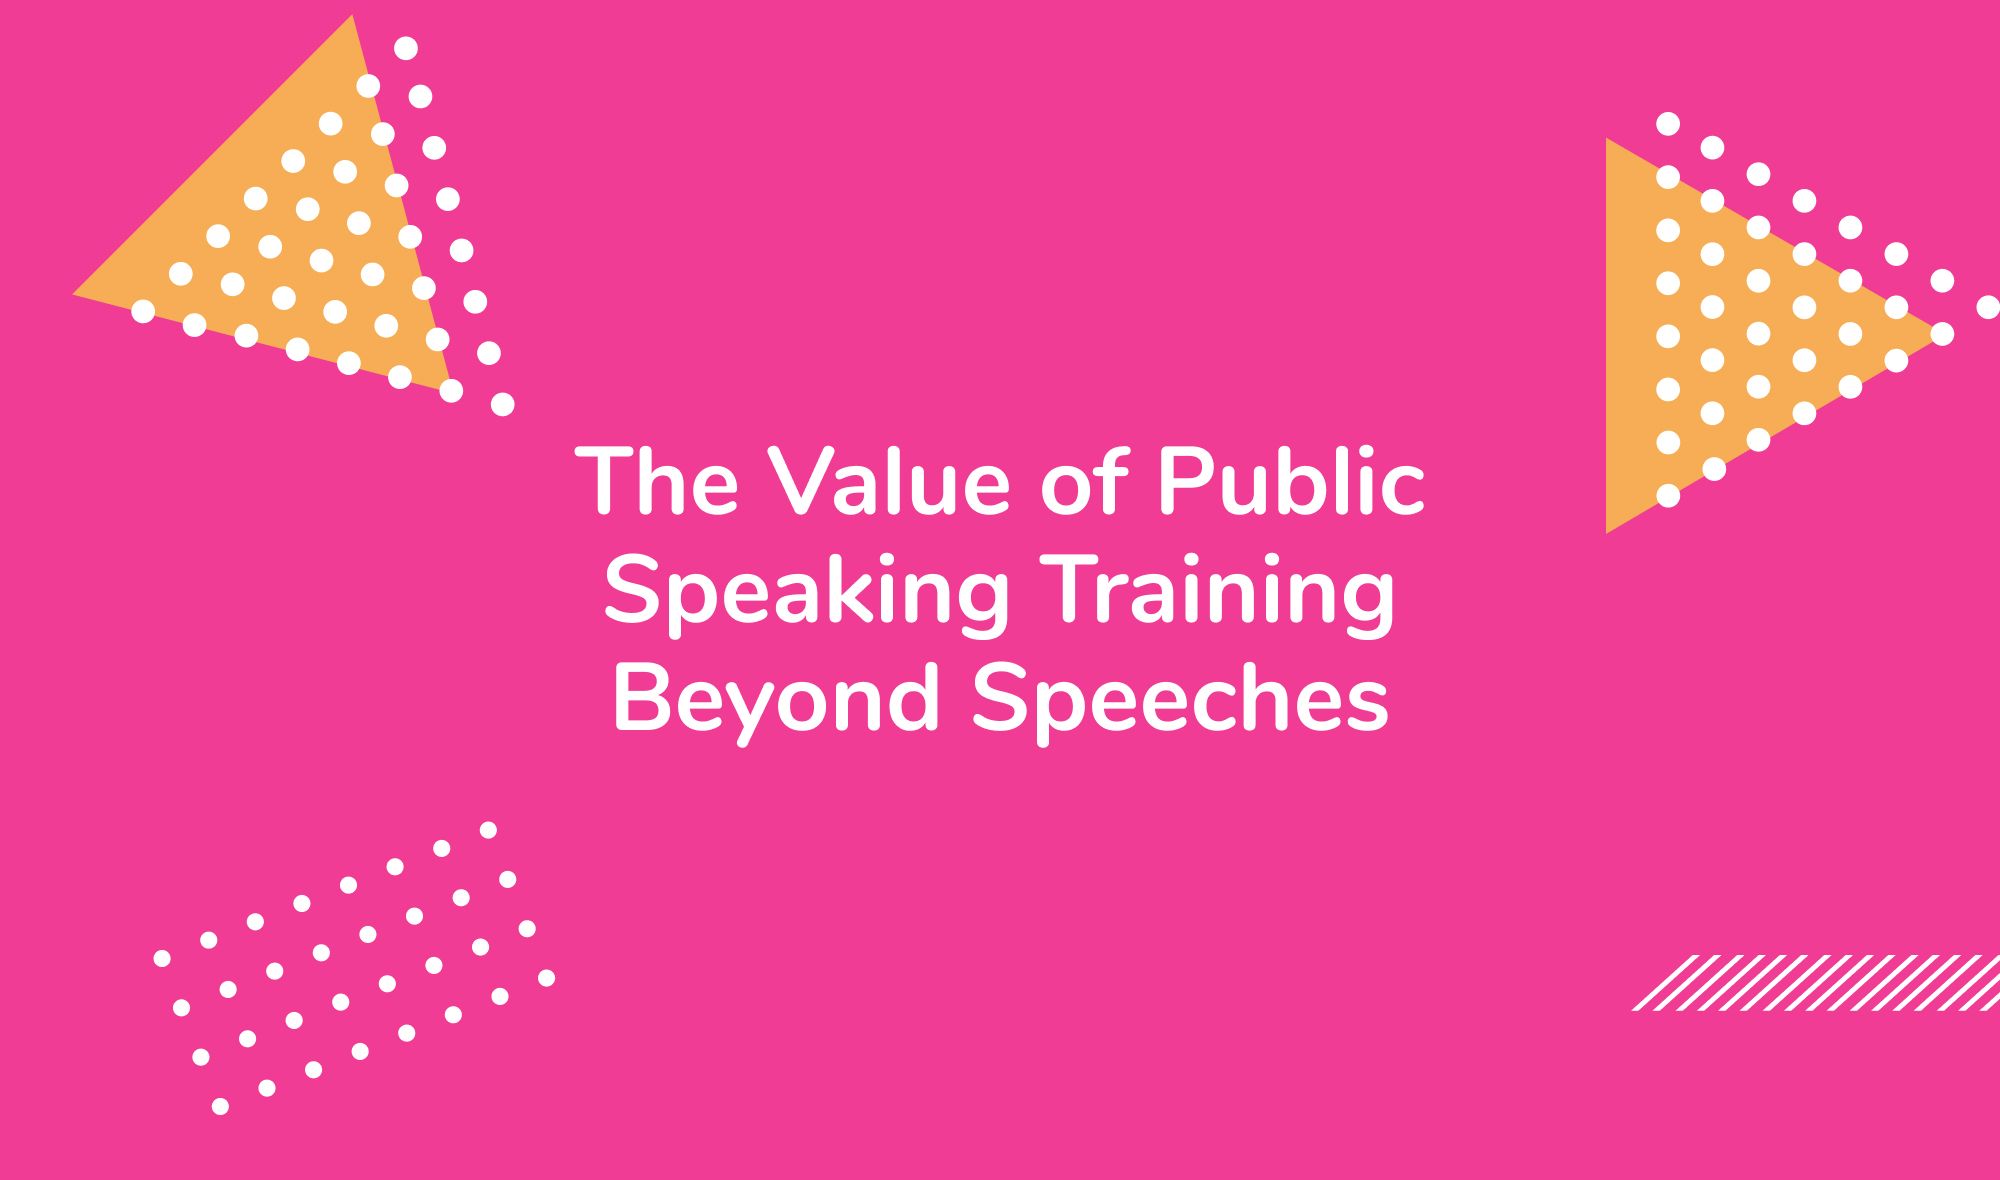 The Value of Public Speaking Training Beyond Speeches